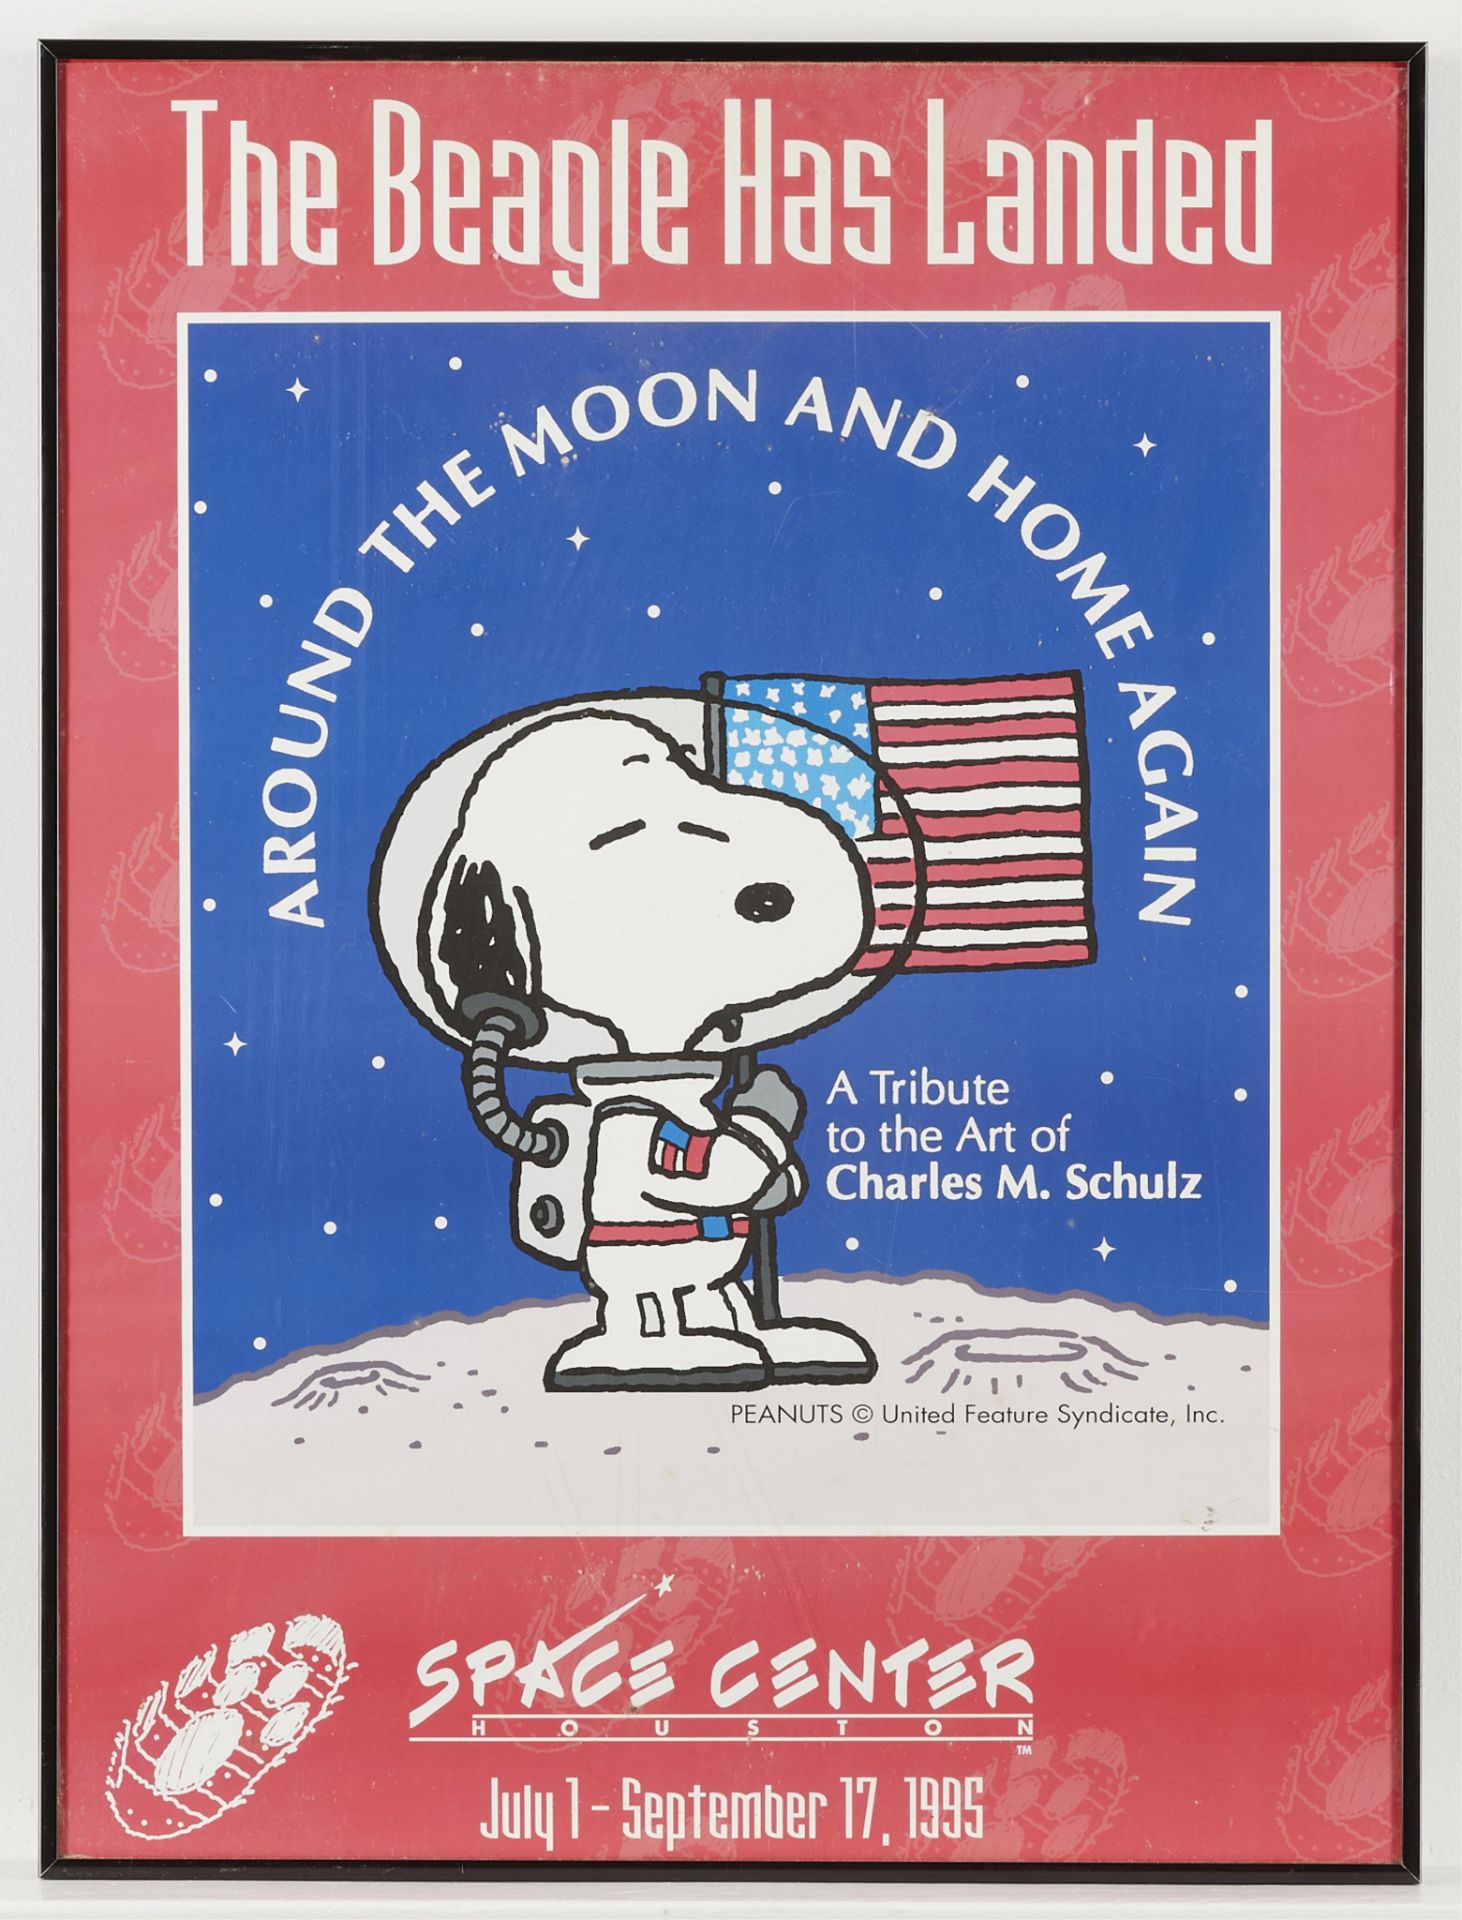 17 Charles Schulz Tribute Exhibition Posters - Image 6 of 8